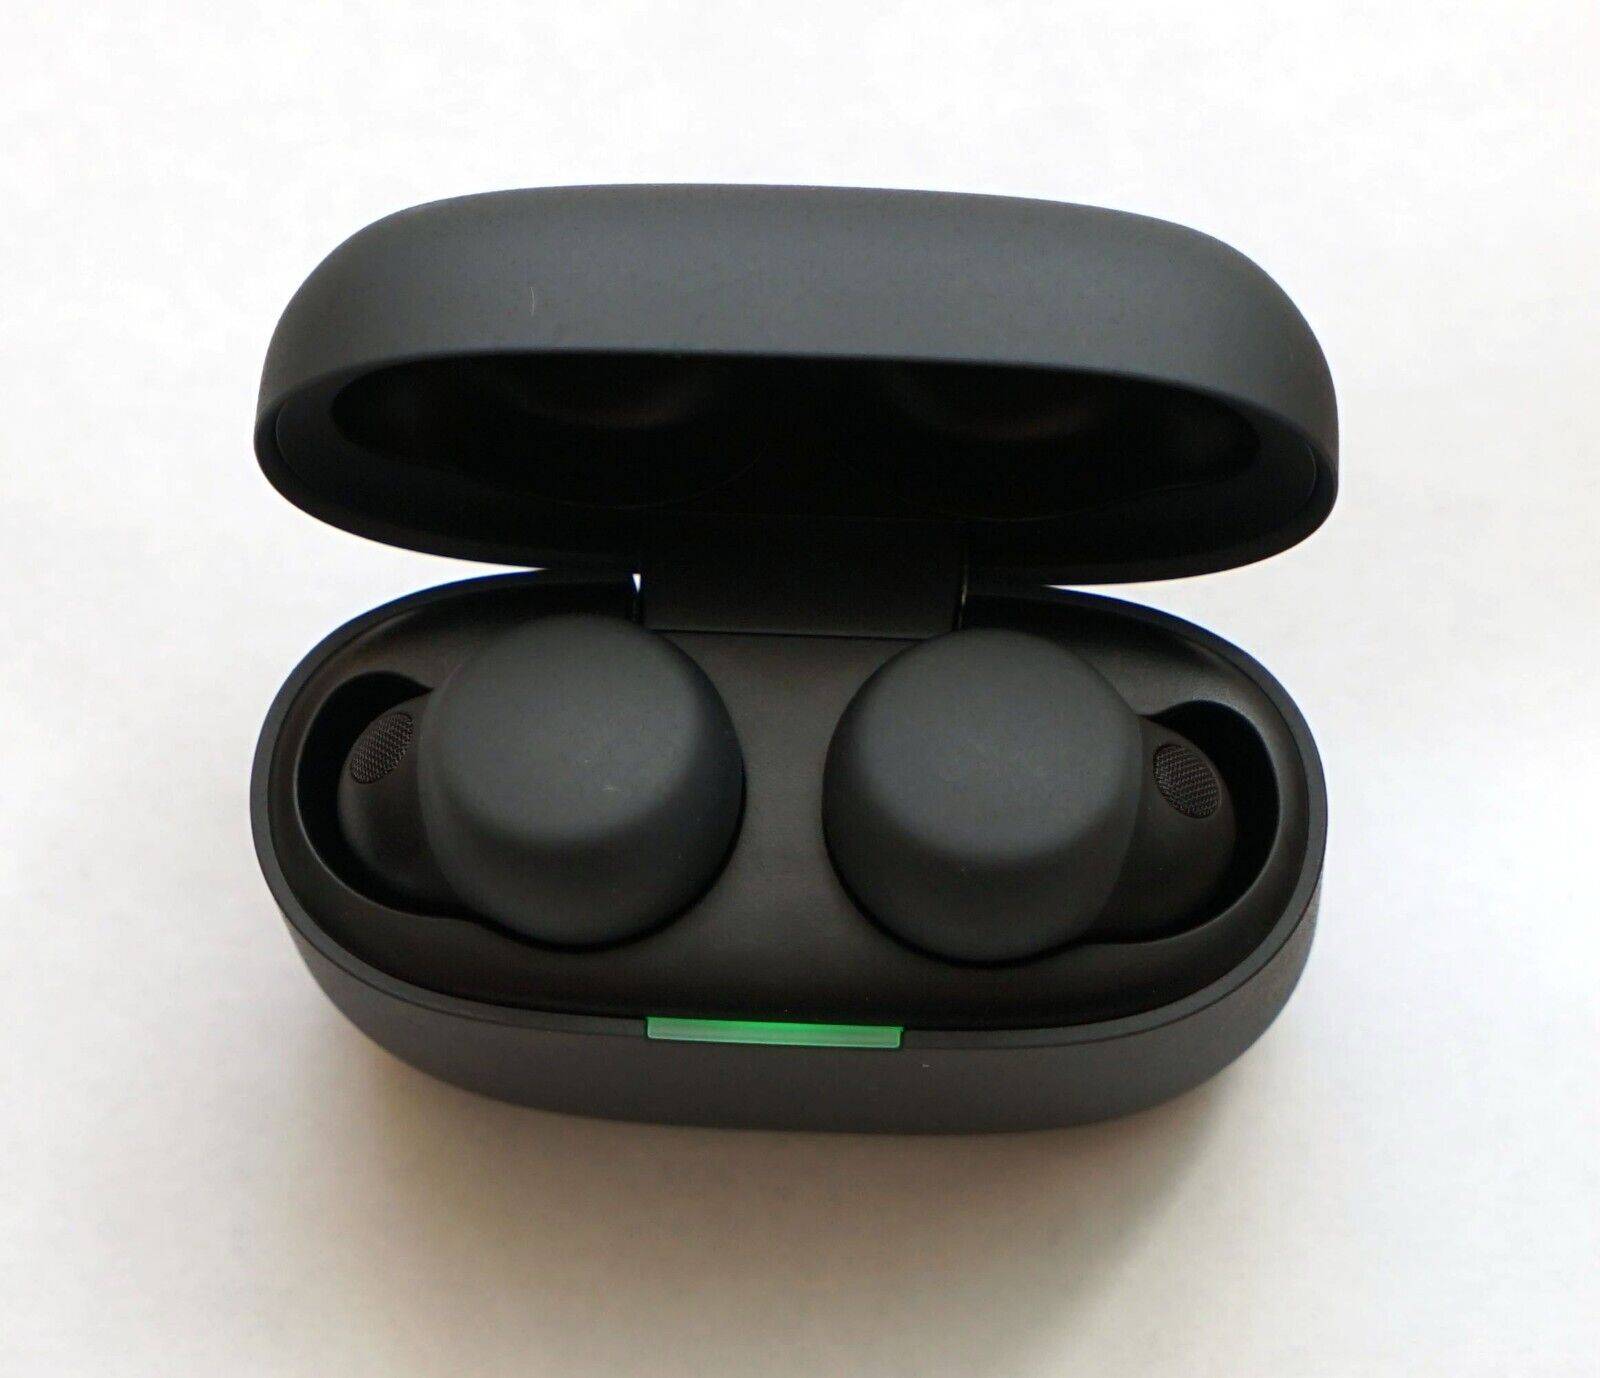 Sony  LinkBuds S Truly Wireless Noise Canceling Earbuds - Product Overview  